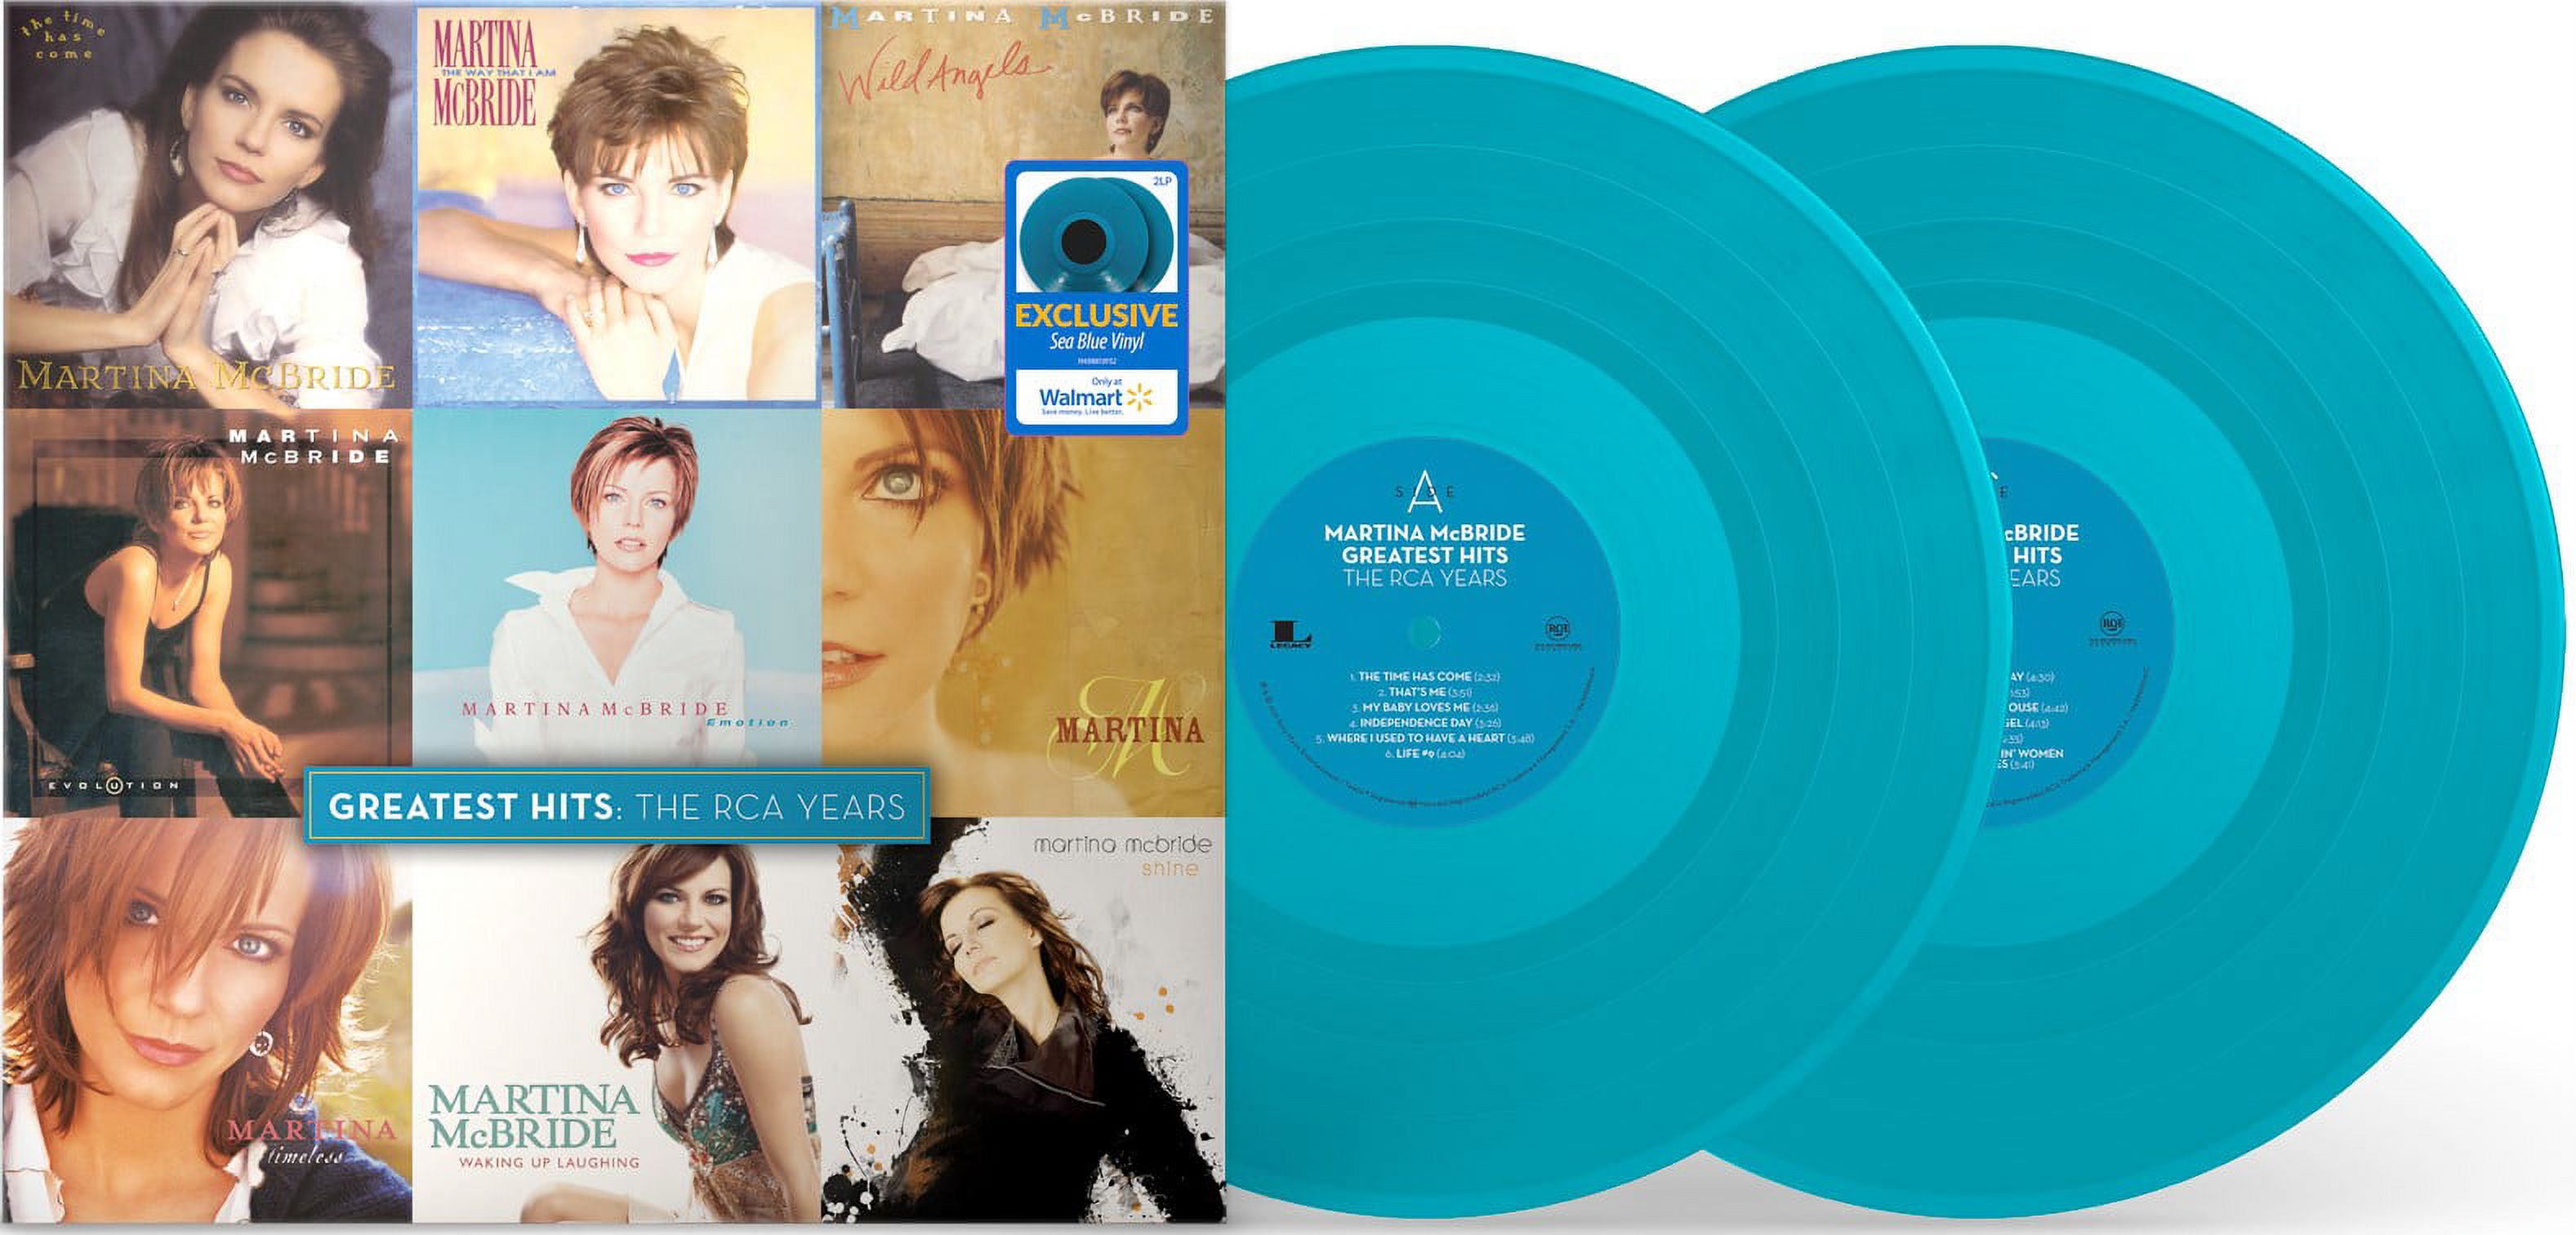 Martina McBride - Greatest Hits: The RCA Years (Walmart Exclusive) - Country - Vinyl [Exclusive] - image 2 of 3